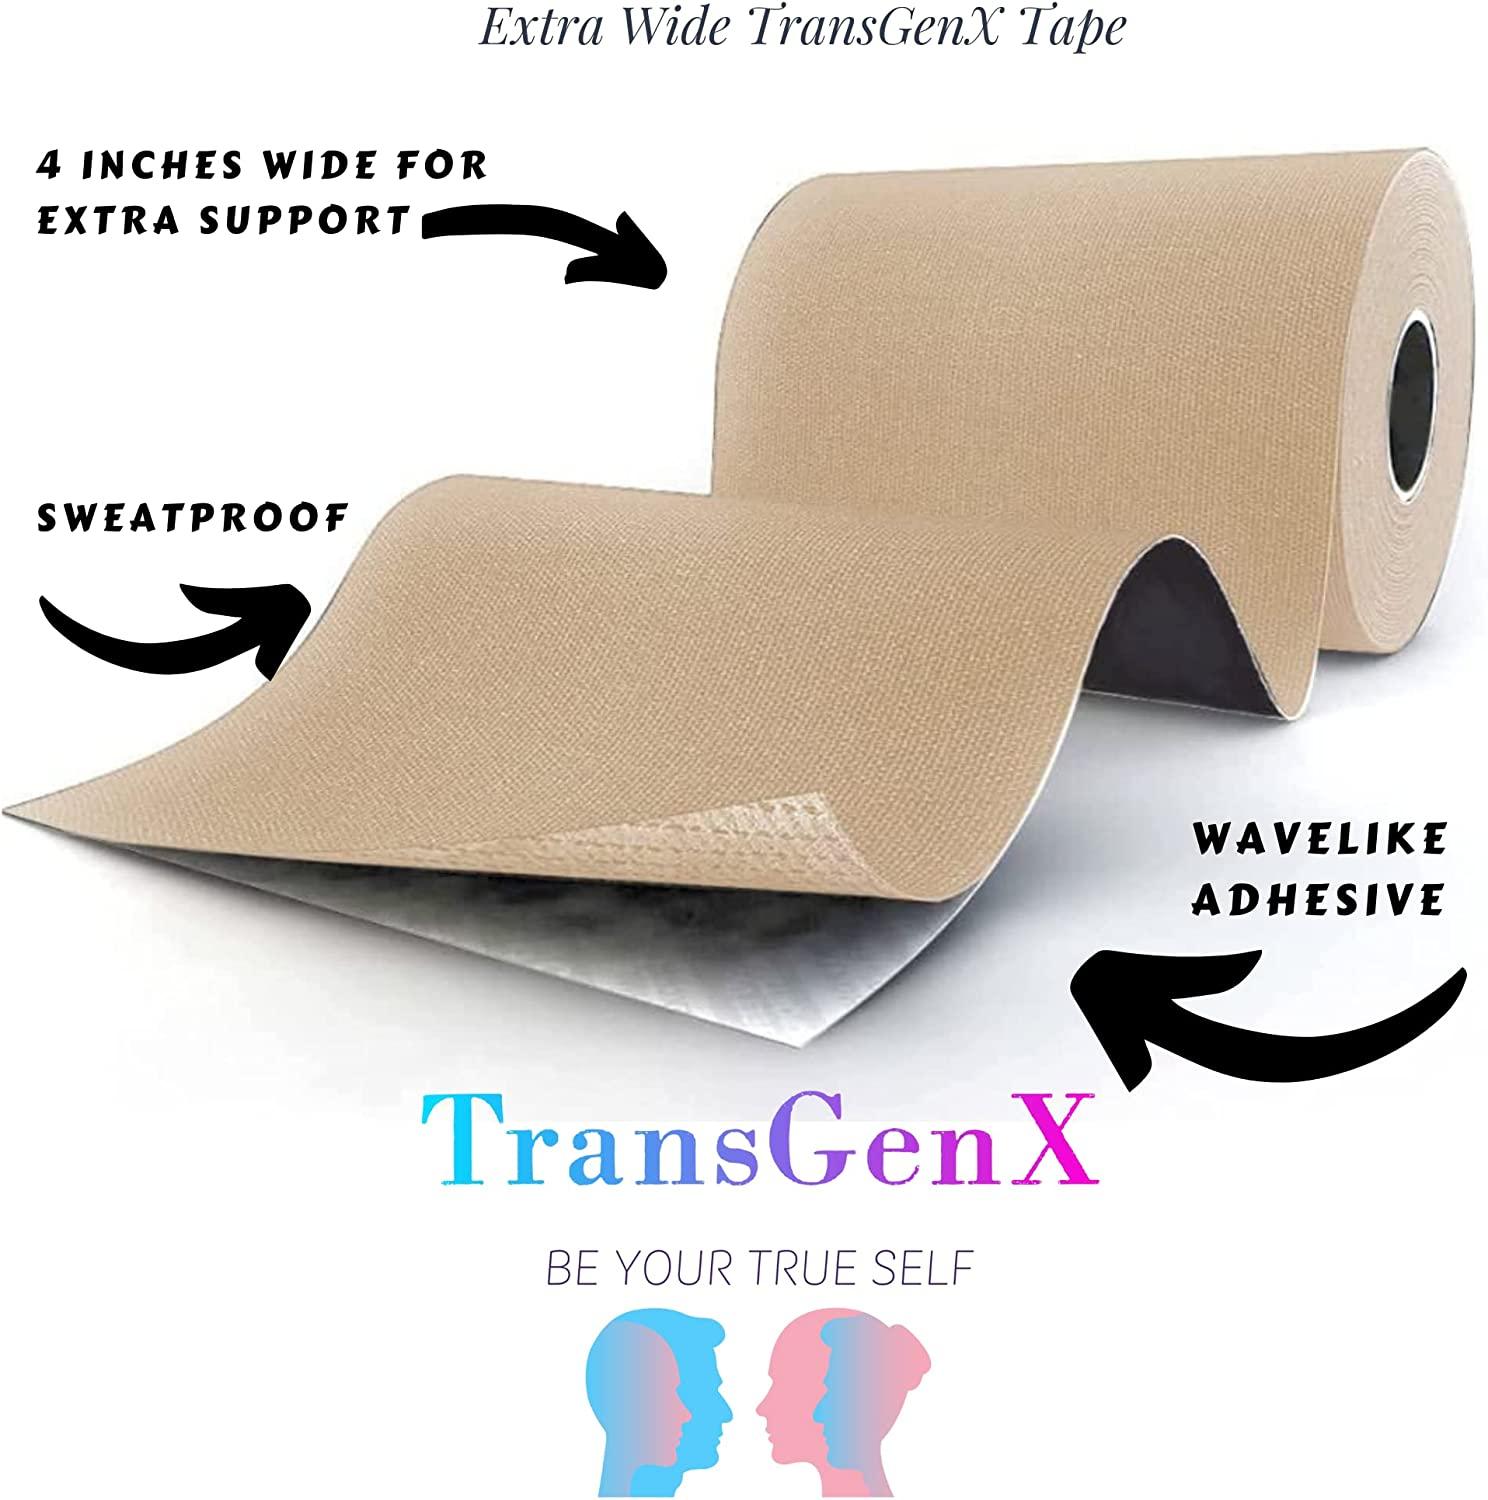 TransGenX 4 Inch Wide Tape. Extra Wide for Trans FTM Chest Binder